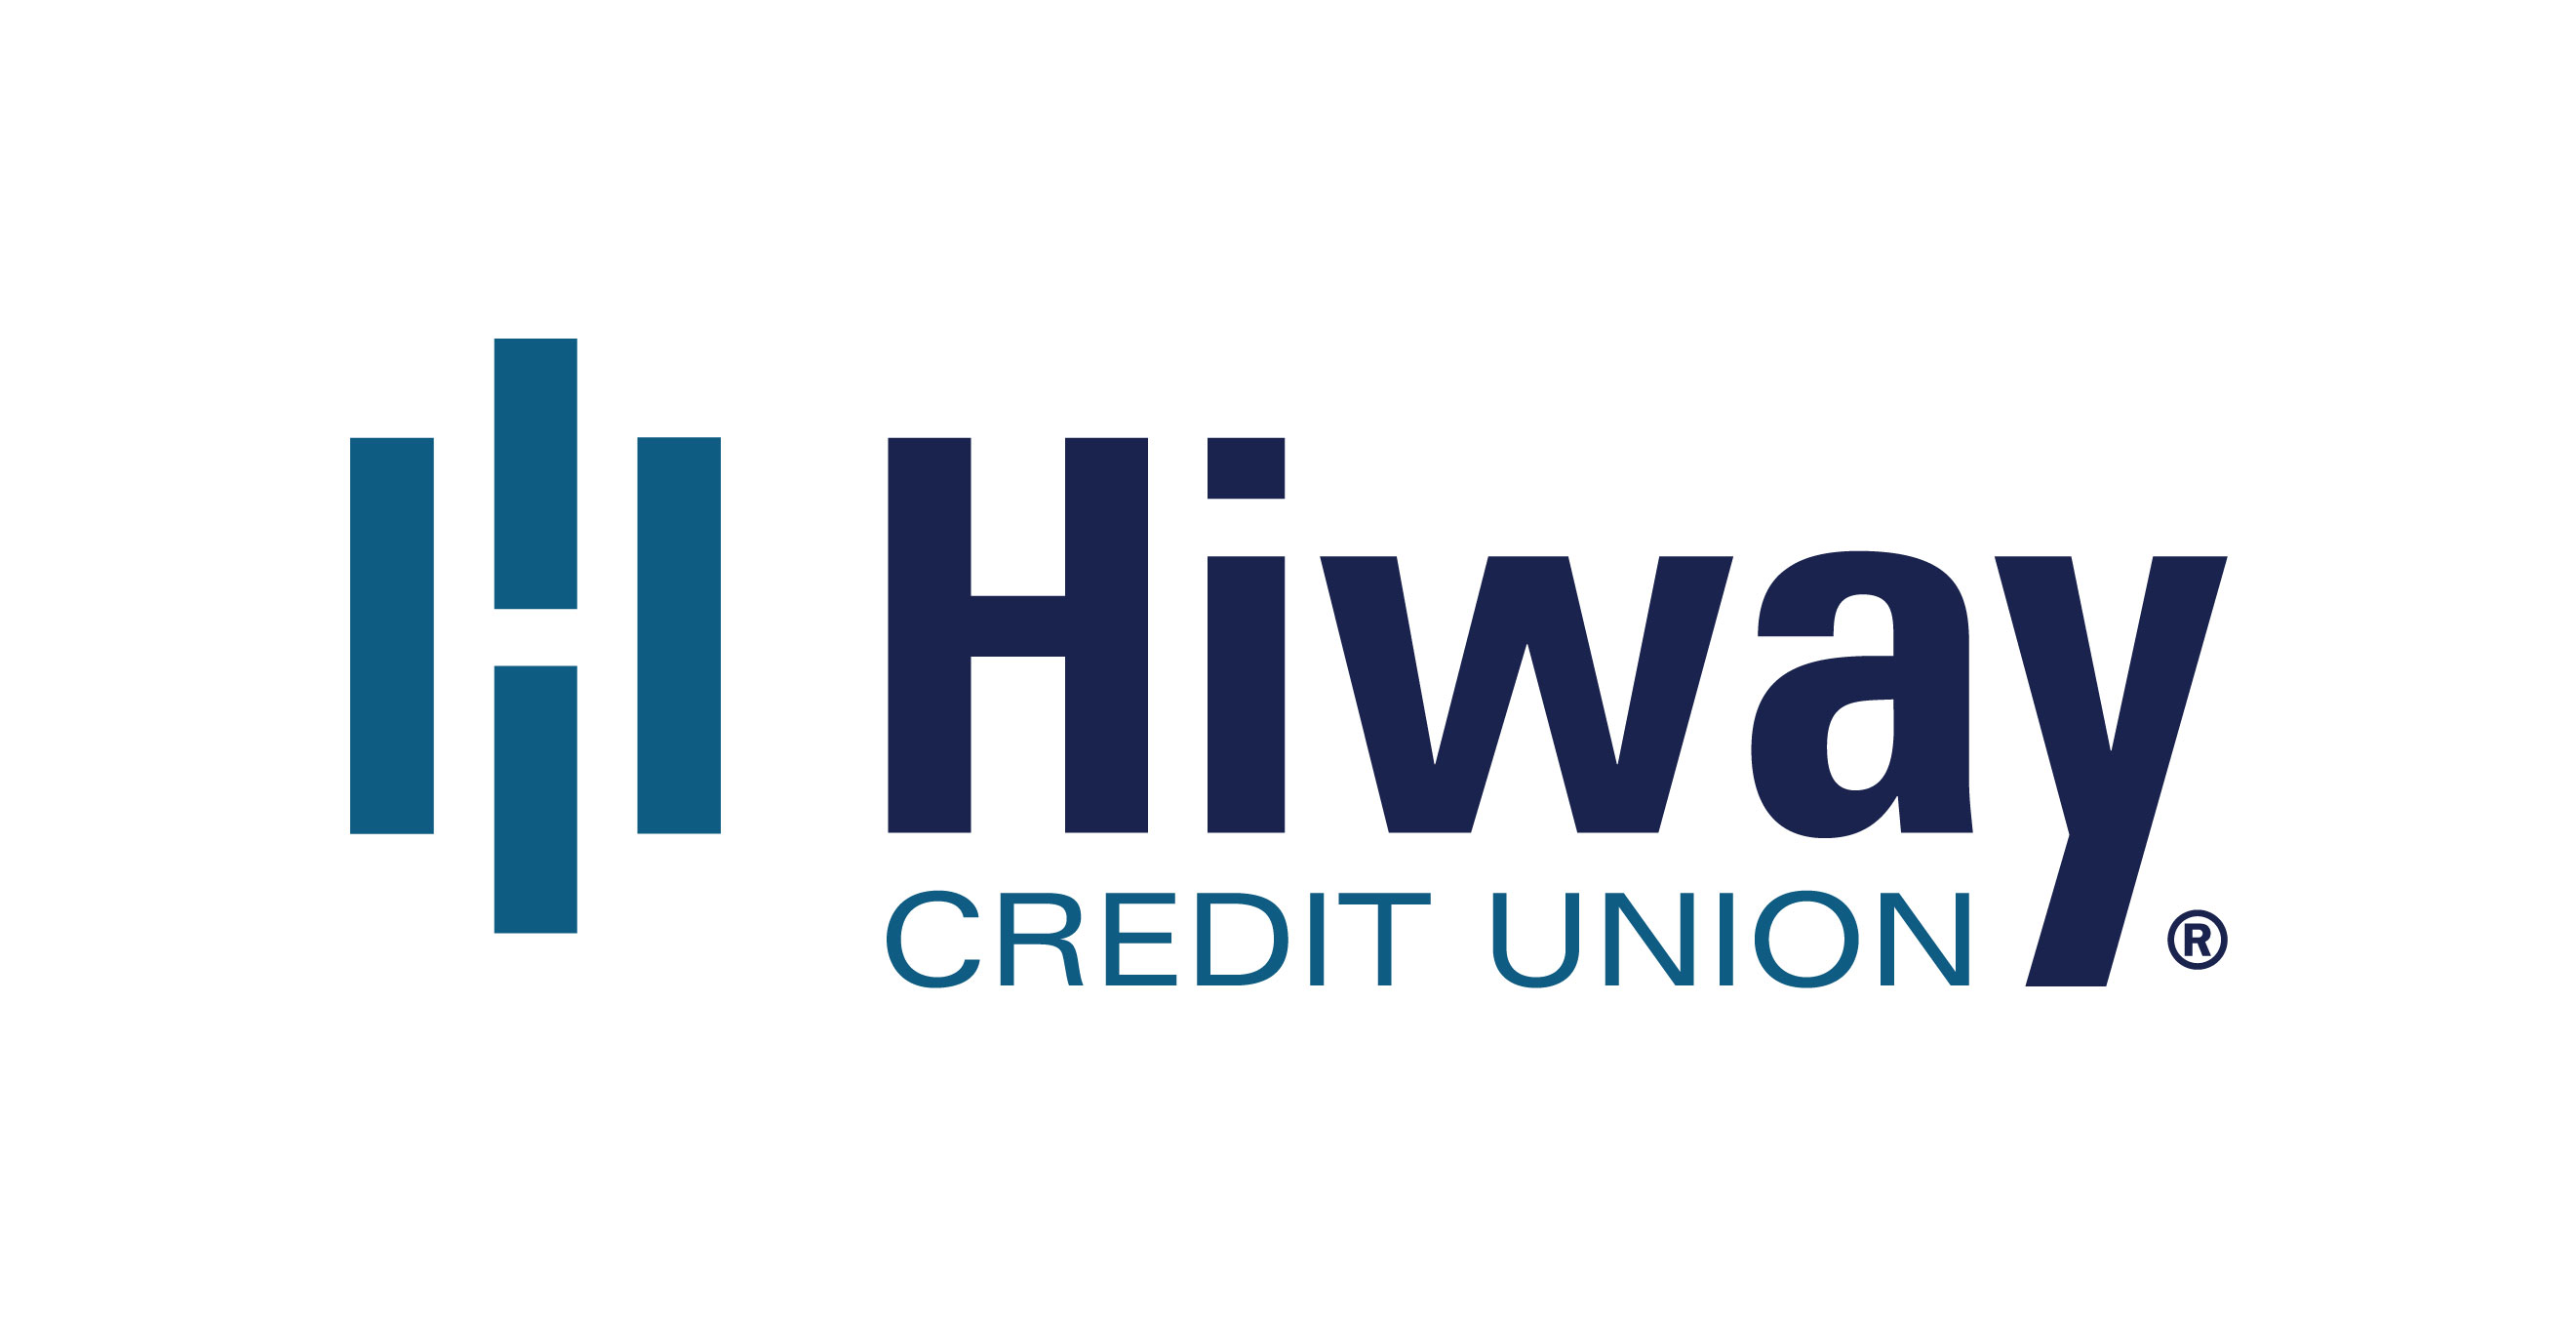 Hiway Federal Credit Union